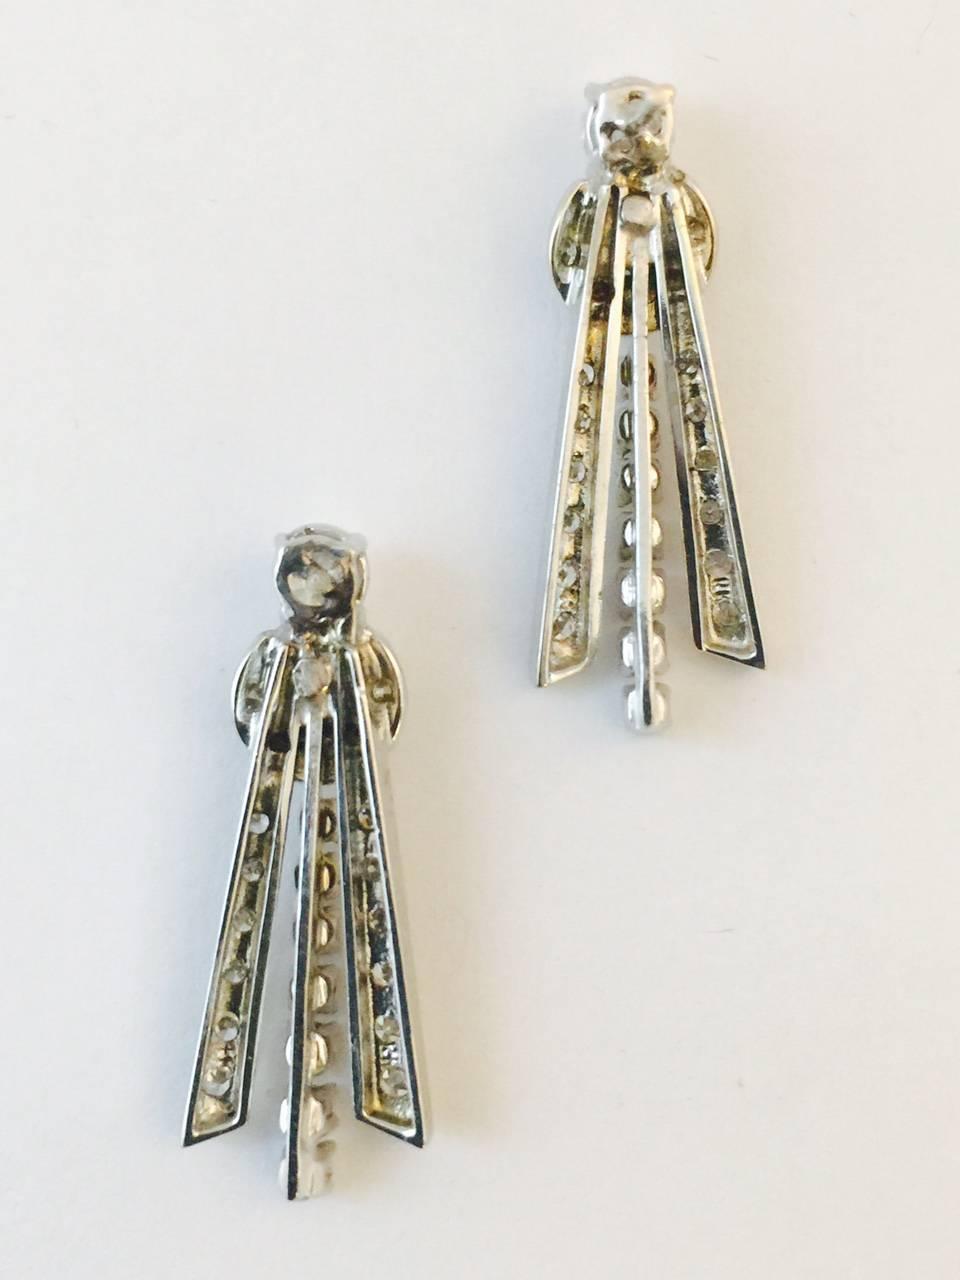 Destined to become your signature earrings!  From jeans to formal, these pierced earrings are fabricated in 14 karat white gold.  Top is a classic brilliant cut diamond, followed by another brilliant cut diamond, both prong set.  A half moon of